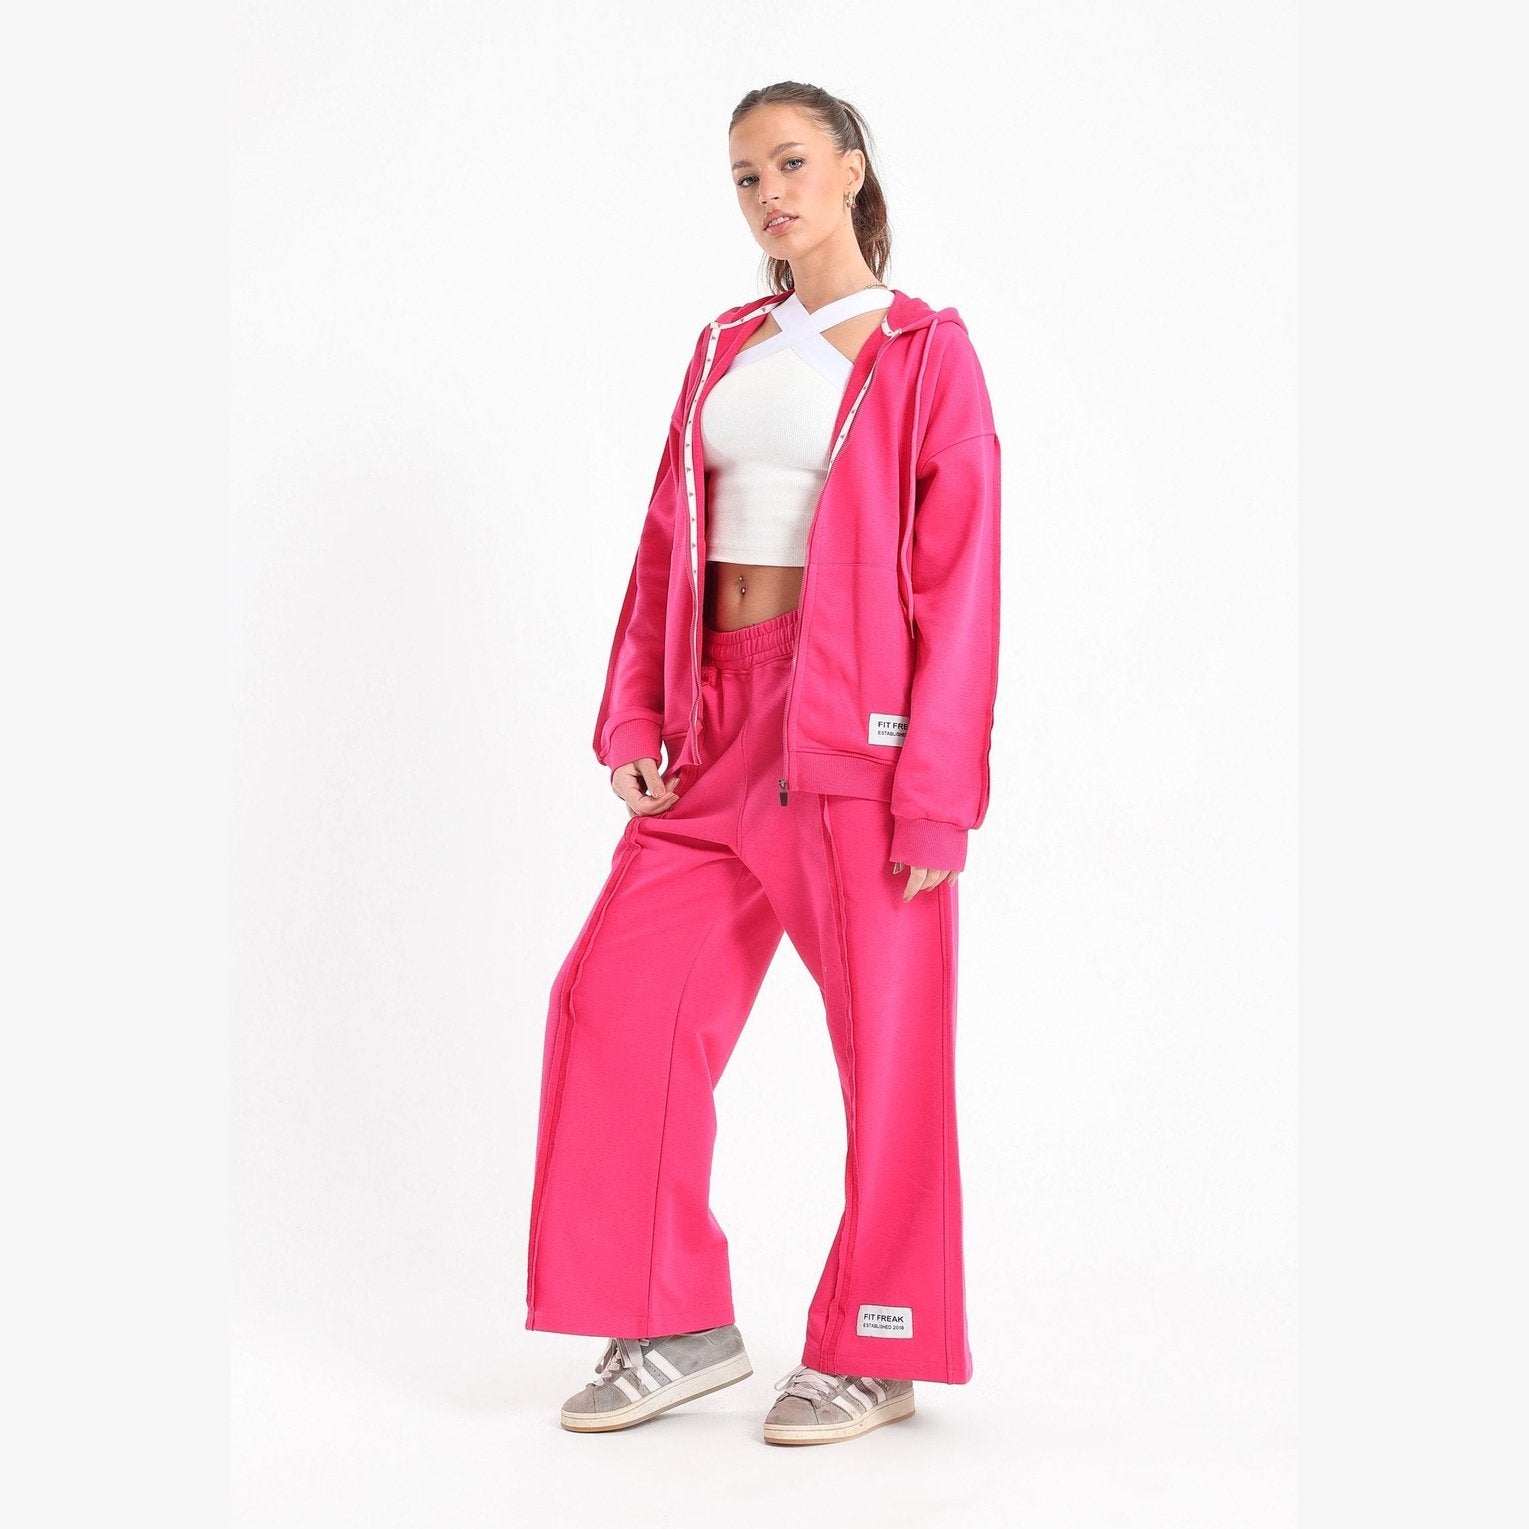 Chill oversized zip up set in hot pink